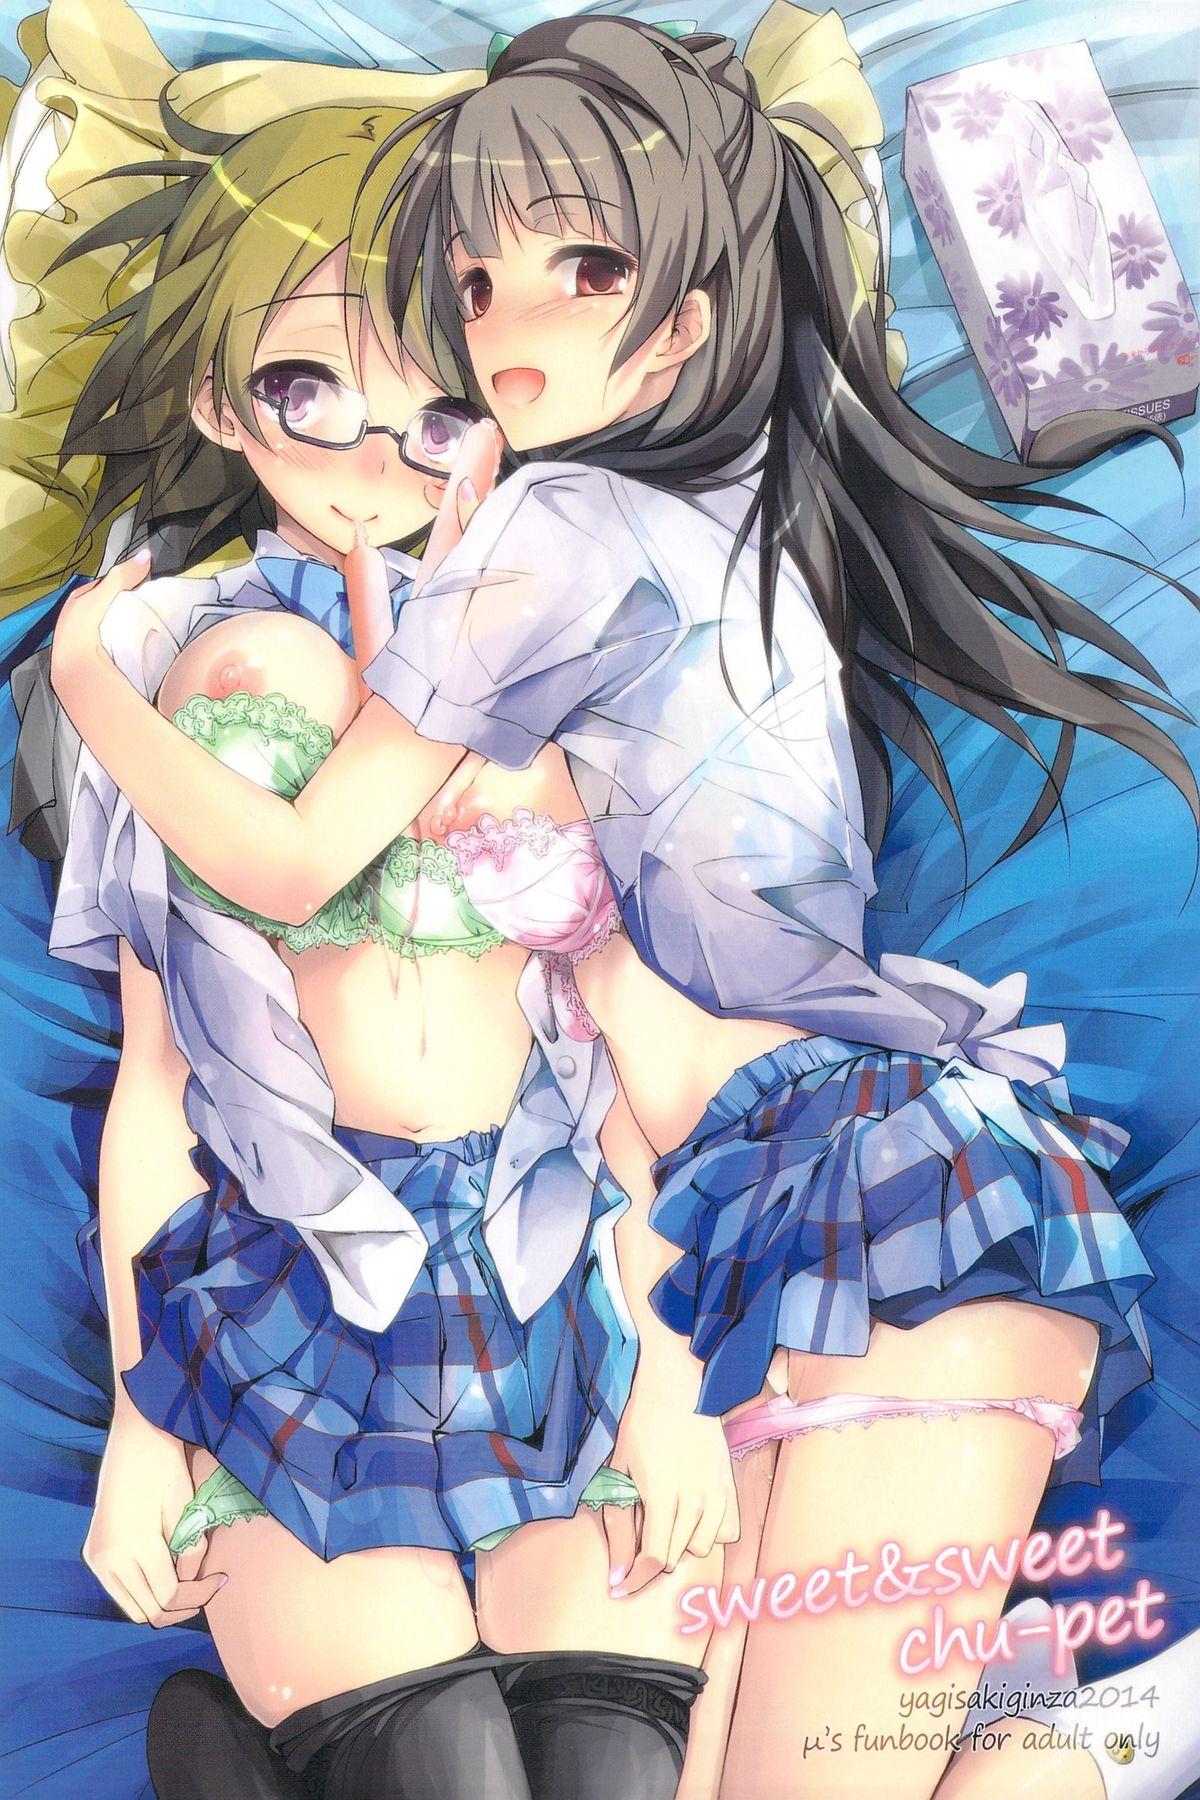 Threesome sweet&sweet chu-pet - Love live Pay - Picture 1